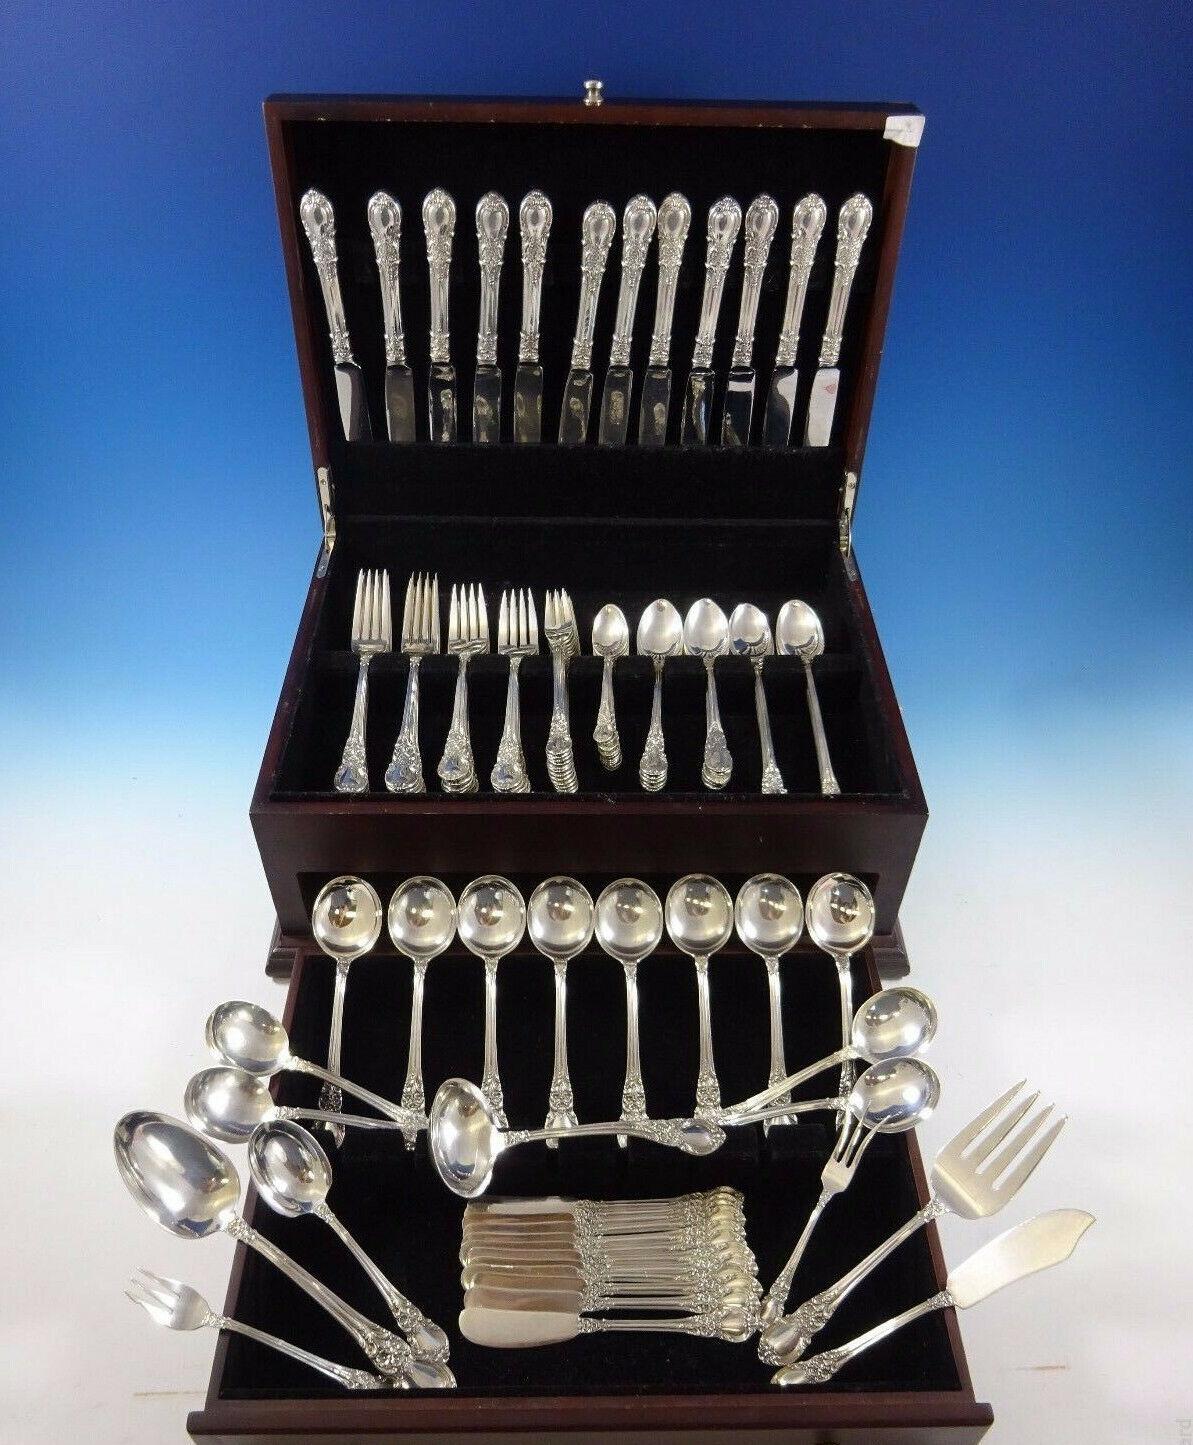 Monumental American Victorian by Lunt sterling silver Flatware set for 12 - 115 pieces. This set includes:


12 knives, 8 3/4